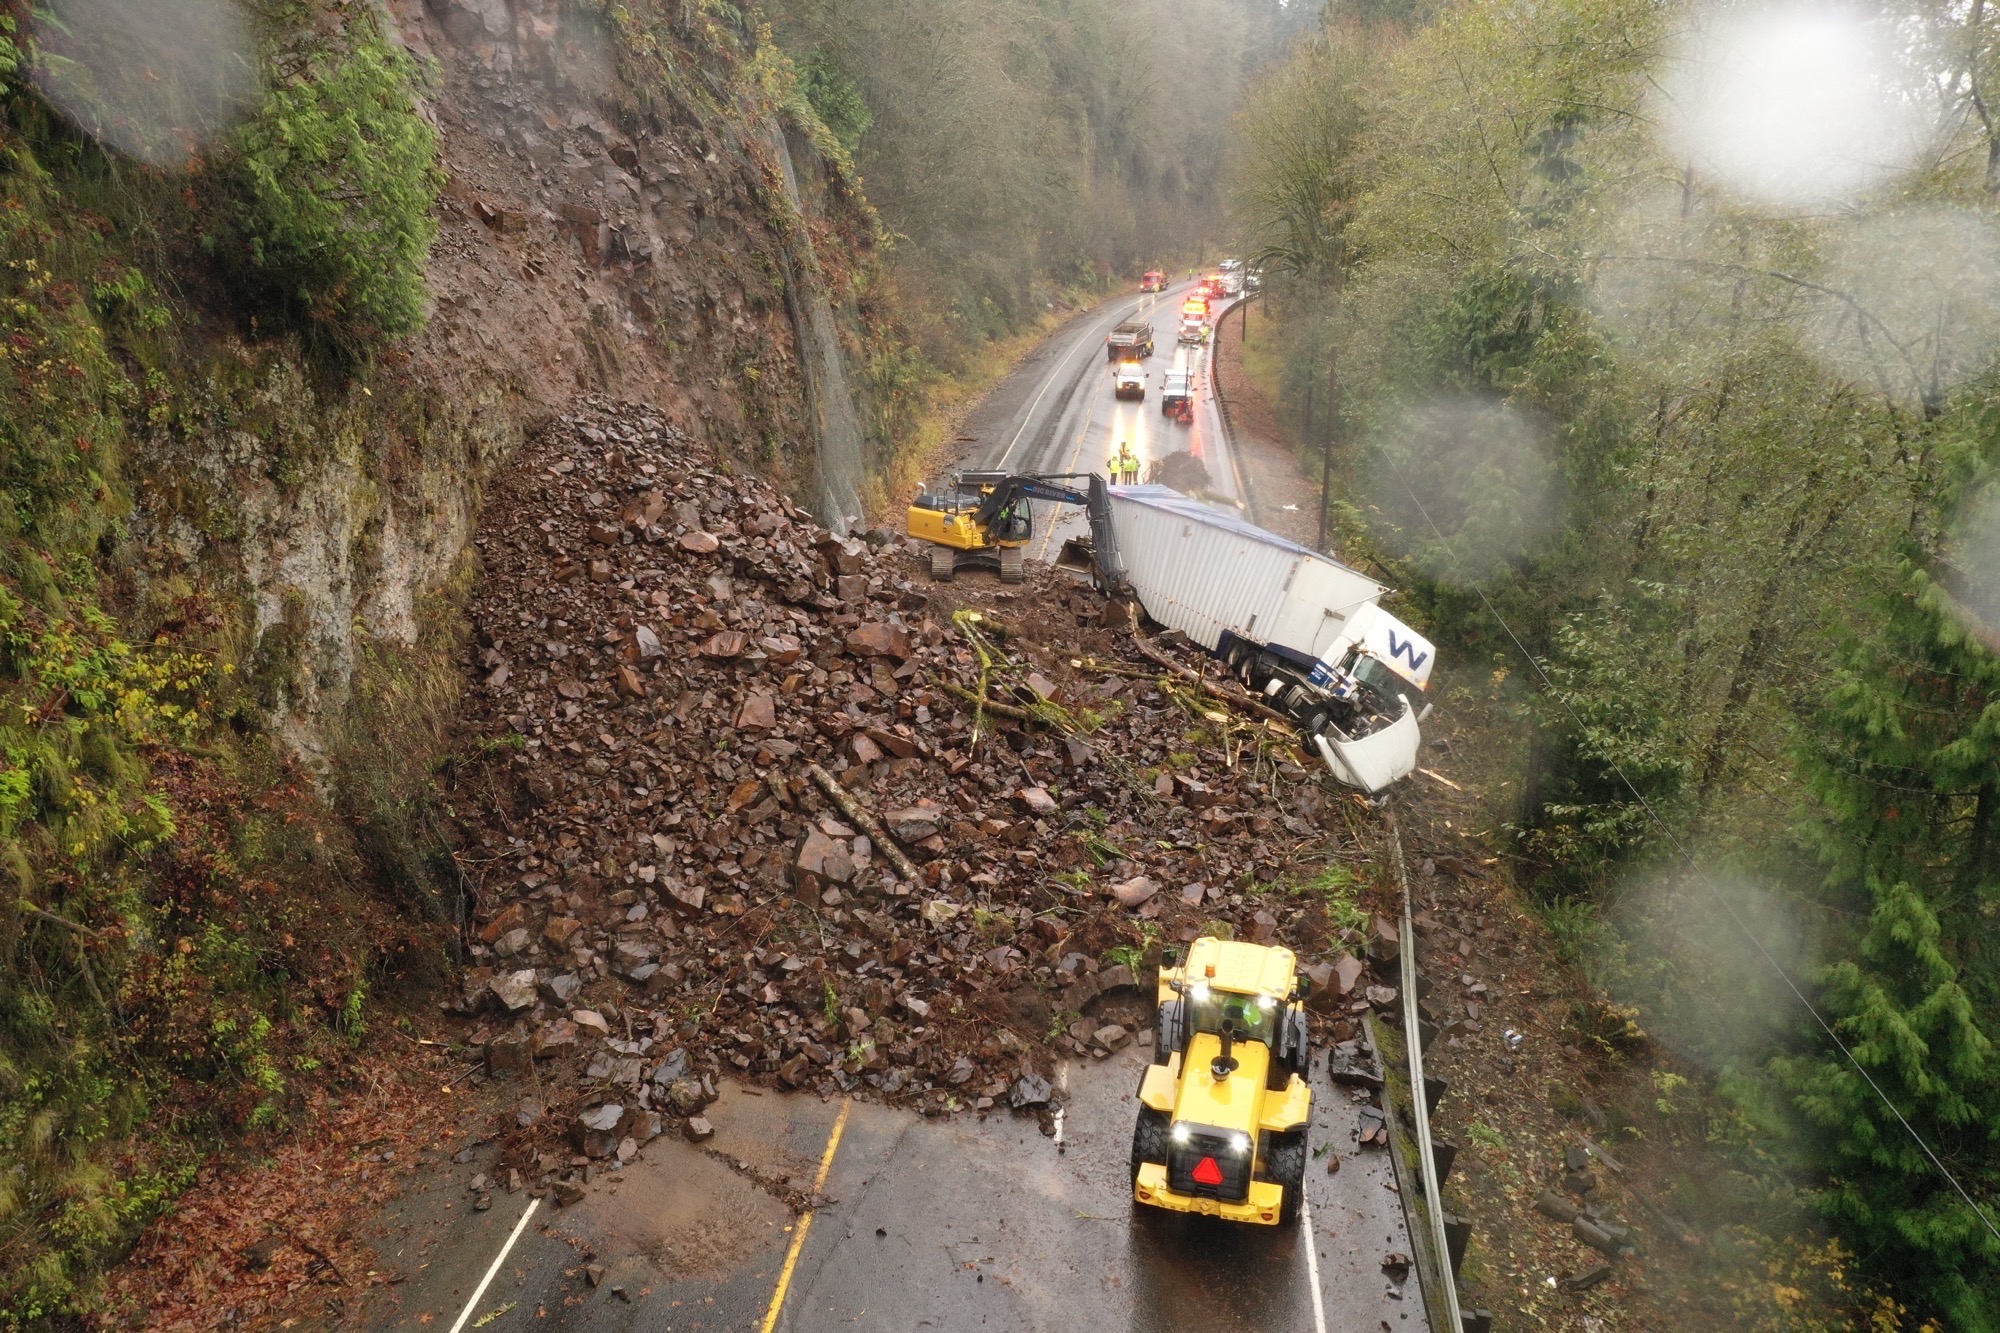 A landslide on the road on US 30 being removed by ODOT crews.